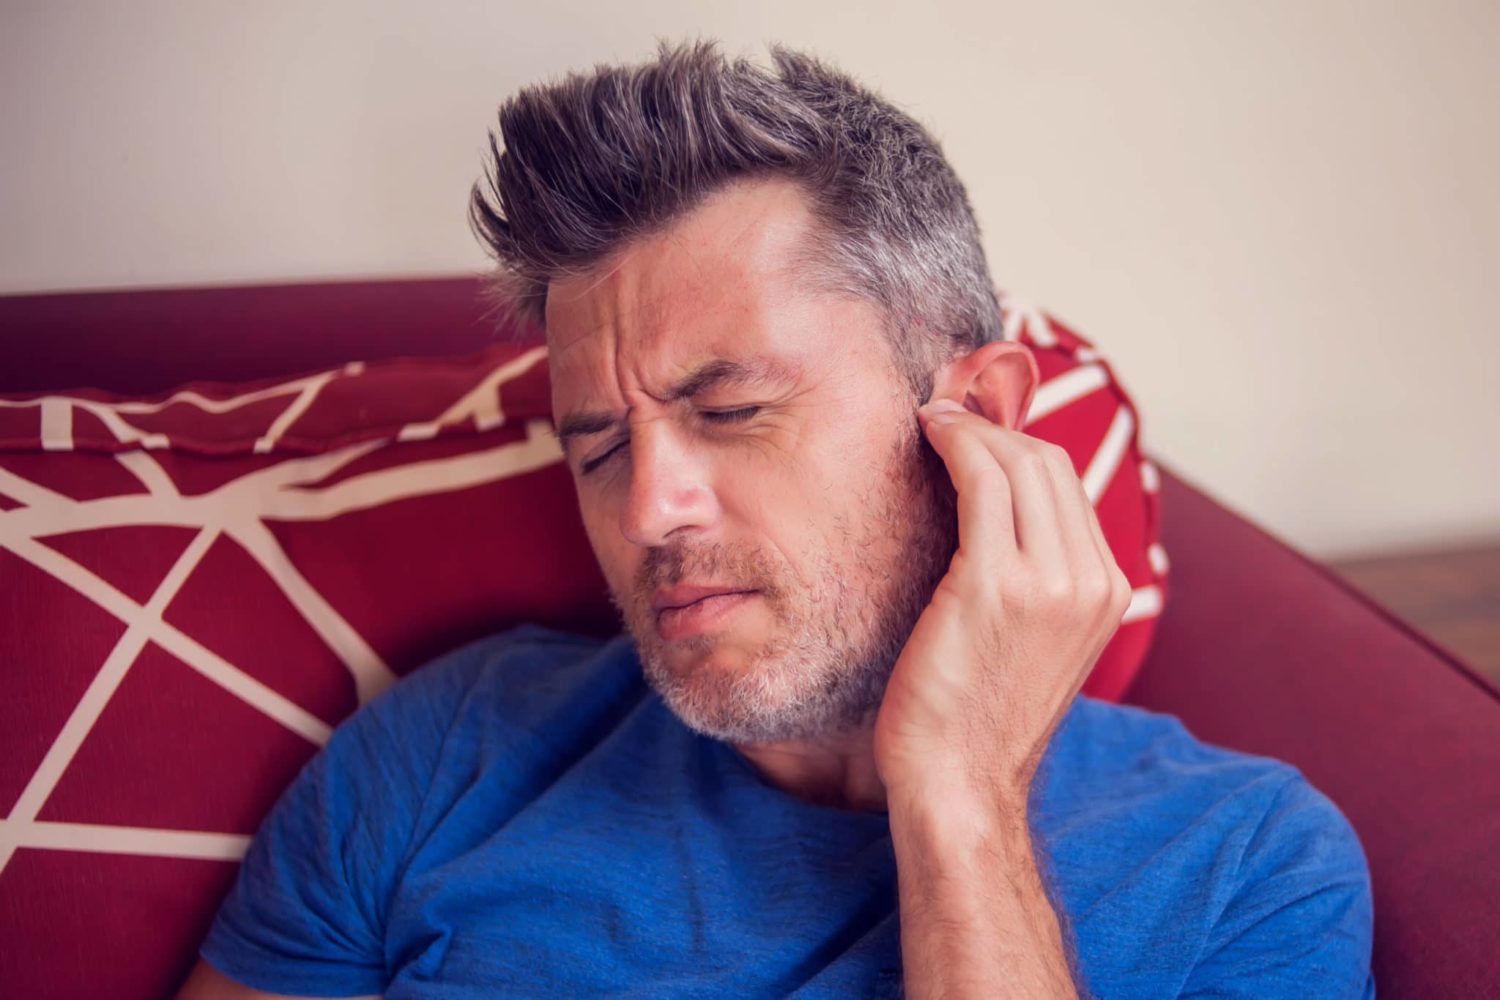 Experiencing tinnitus ear pain, a man put his hand to his ear for pain relief in Pennsylvania.